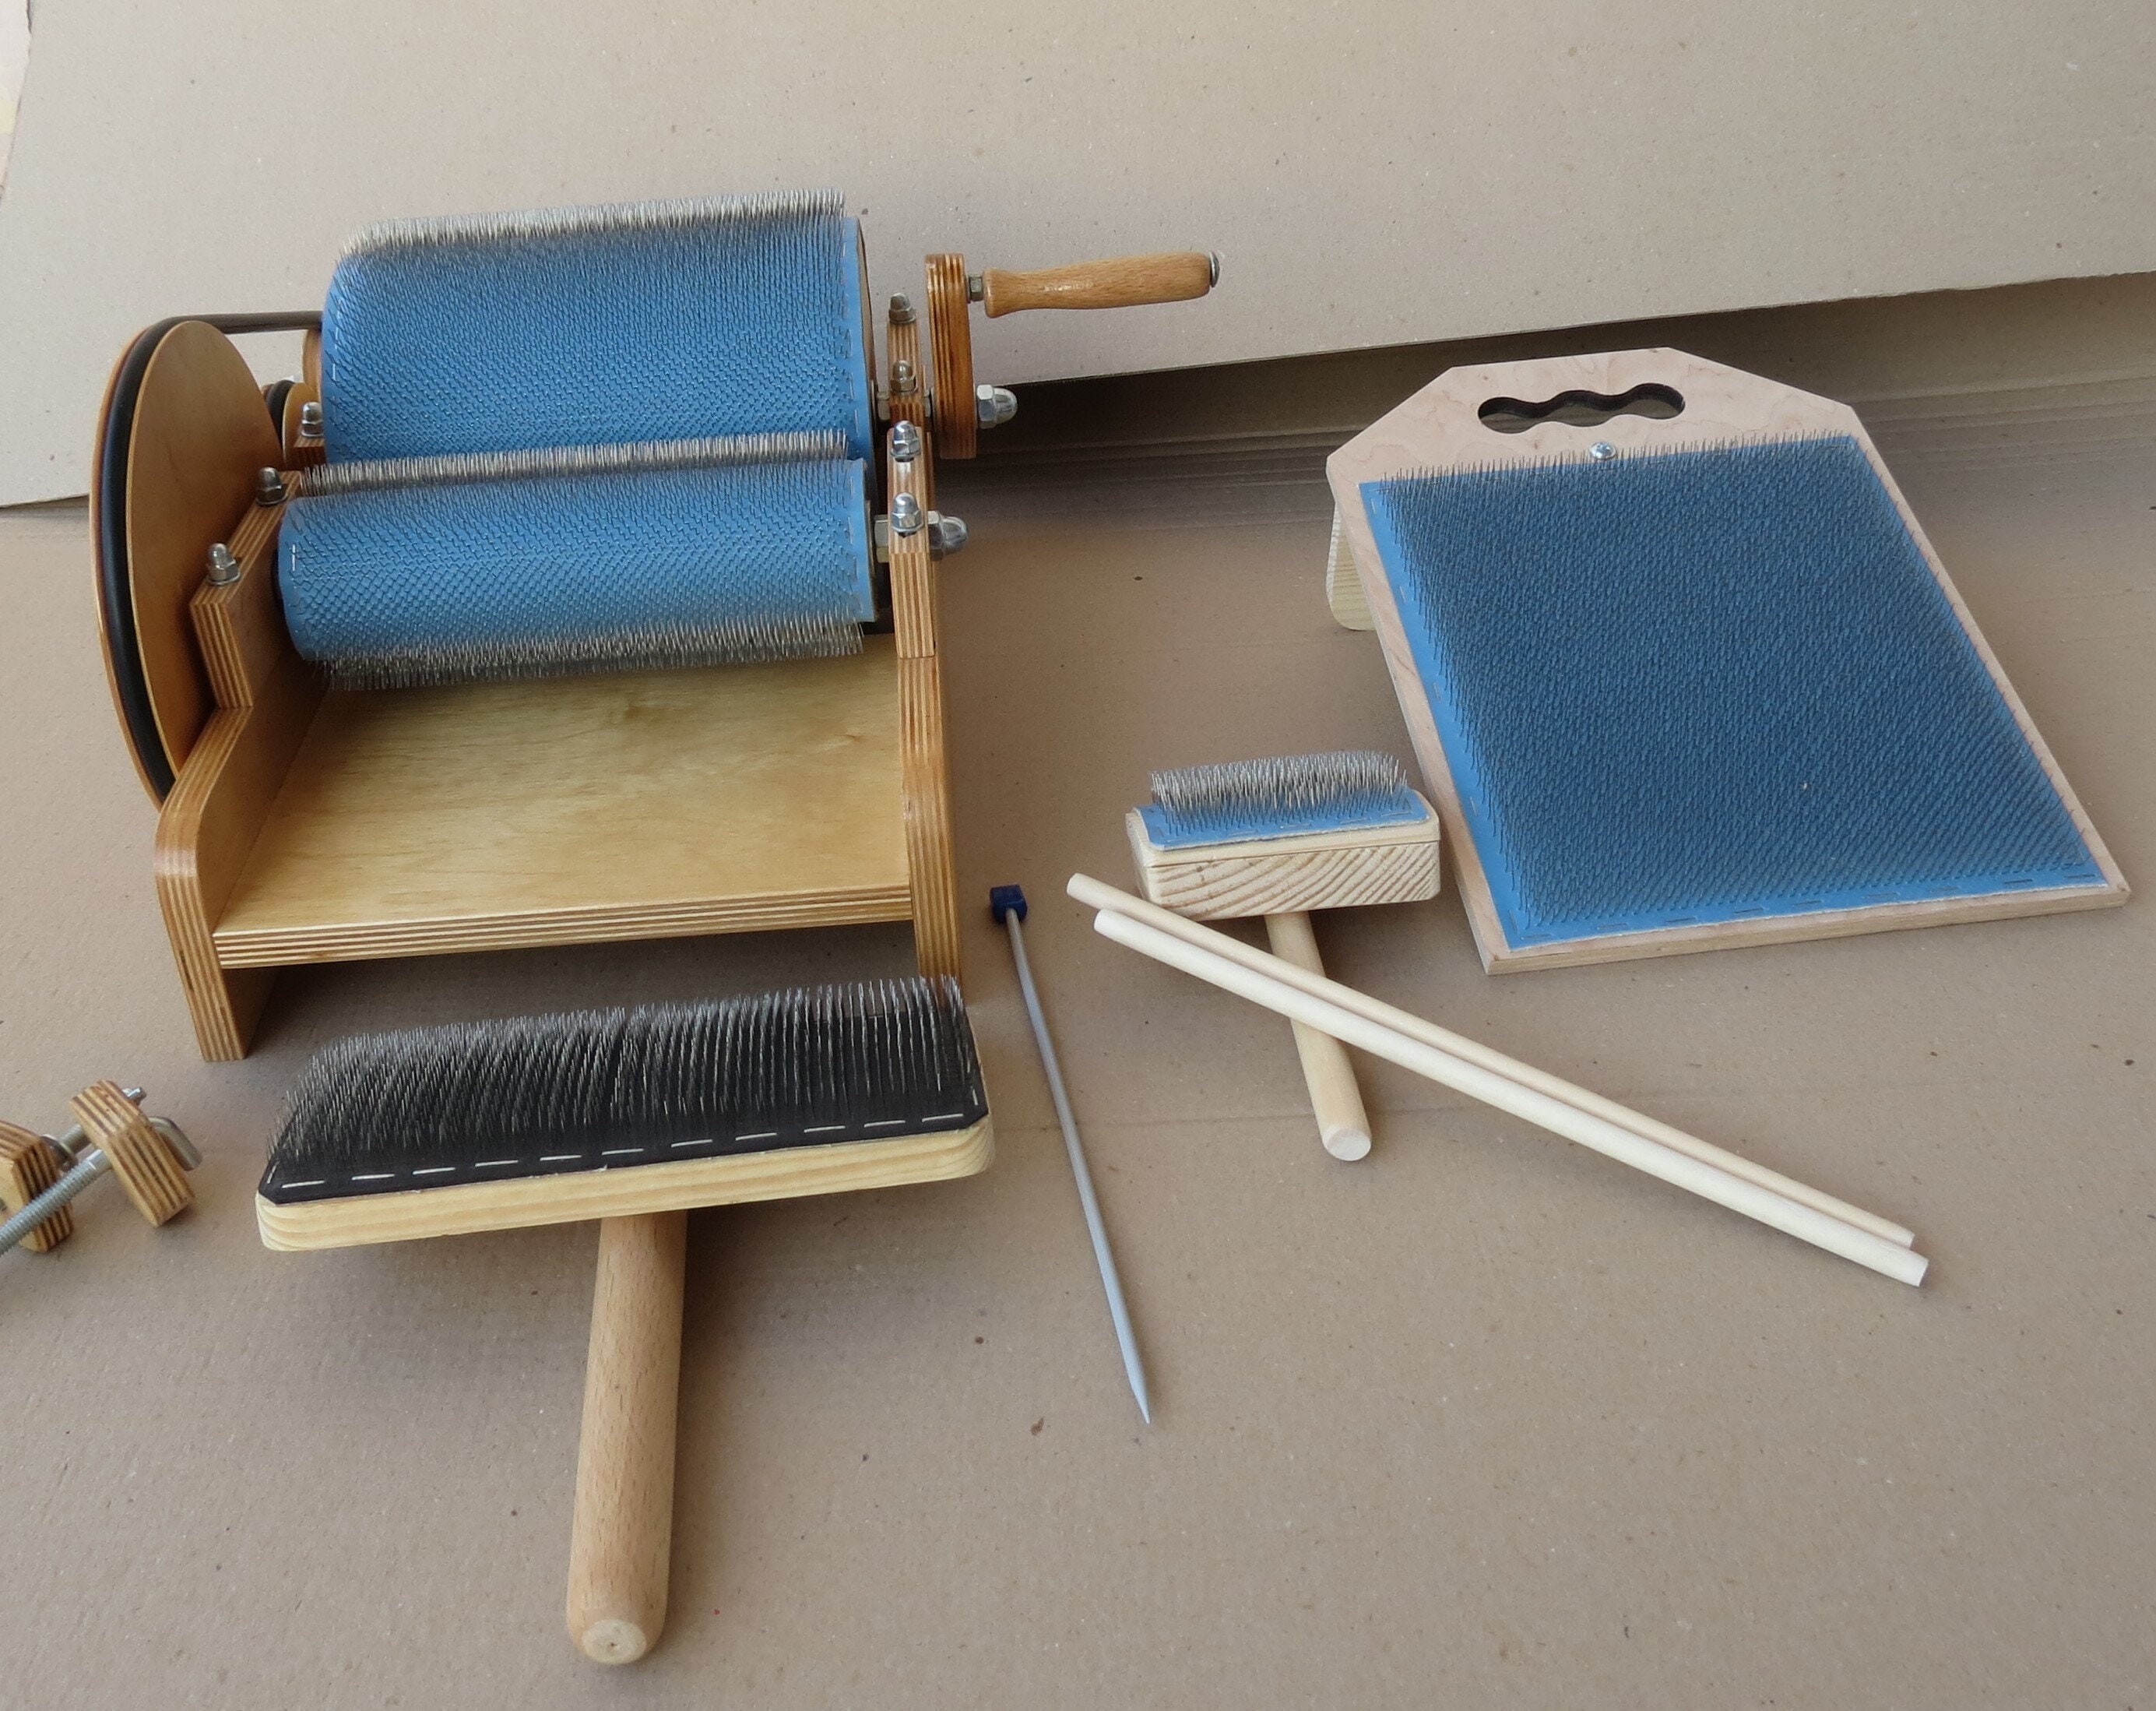 Rtteri 2 Pcs Wooden Wool Carder with Drop Spindle Hand Carders